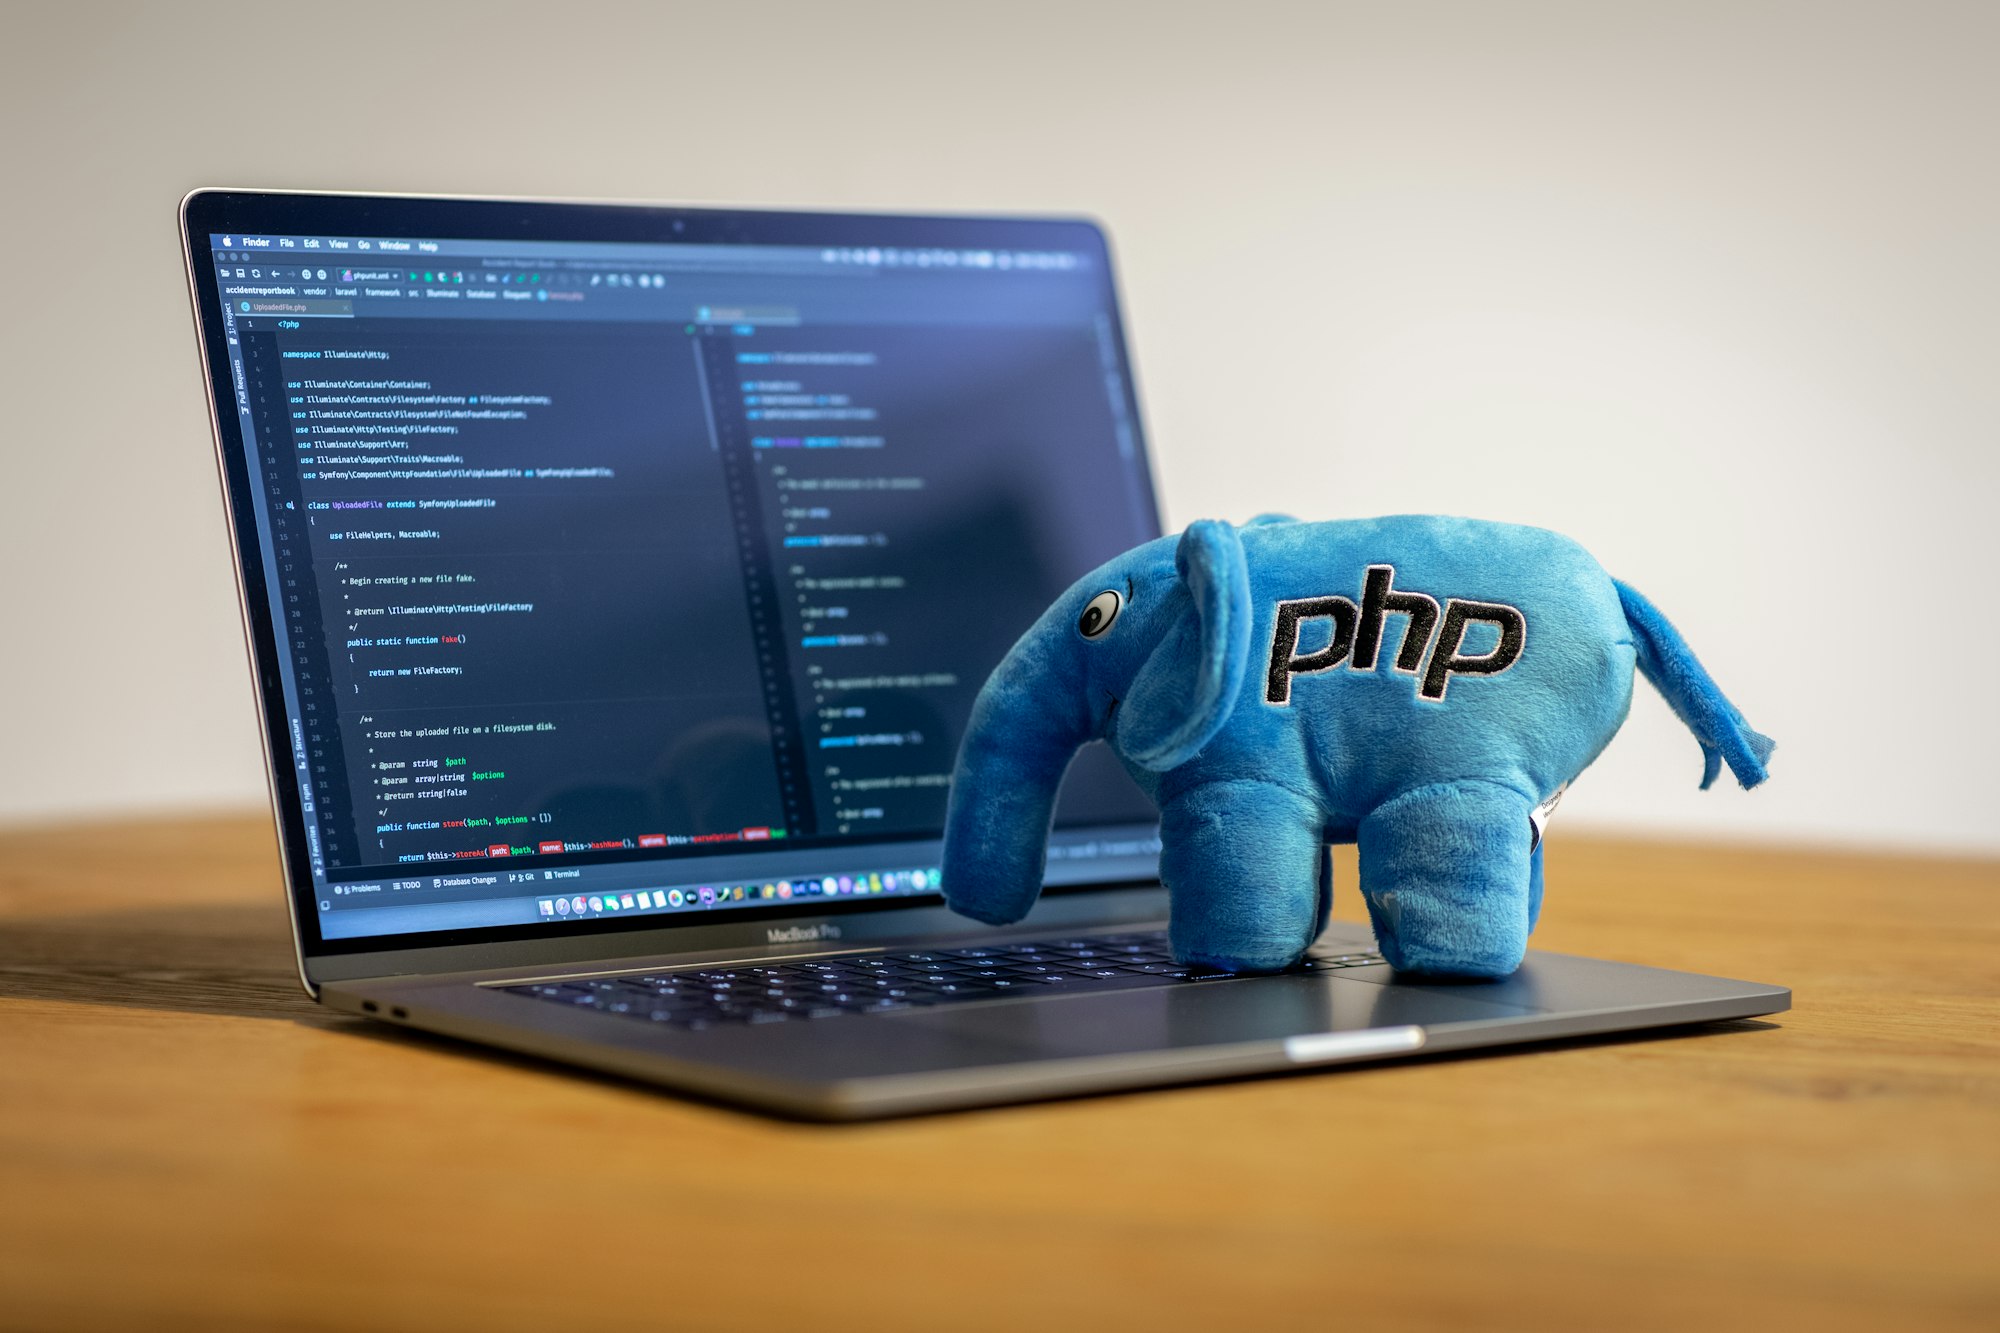 FreeBSD, Caddy and PHP - a perfect match